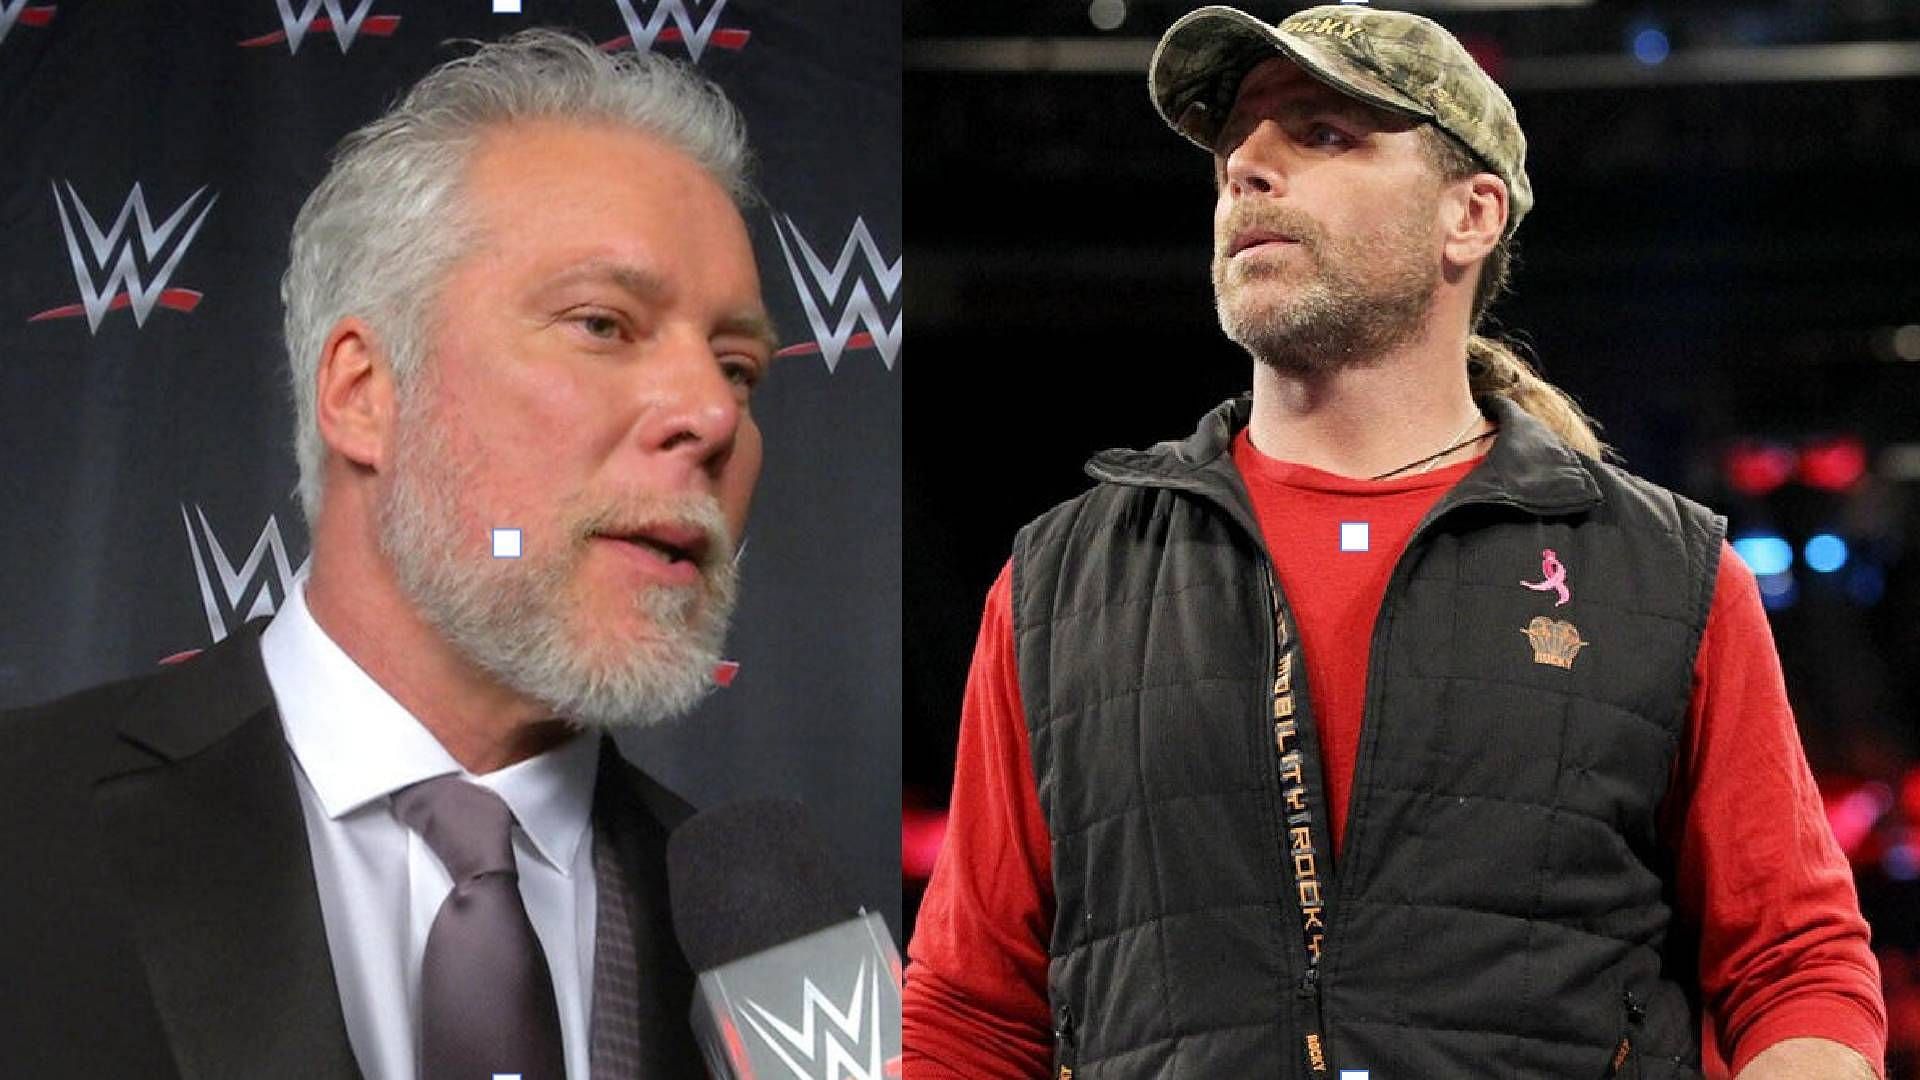 Kevin Nash and Shawn Michaels